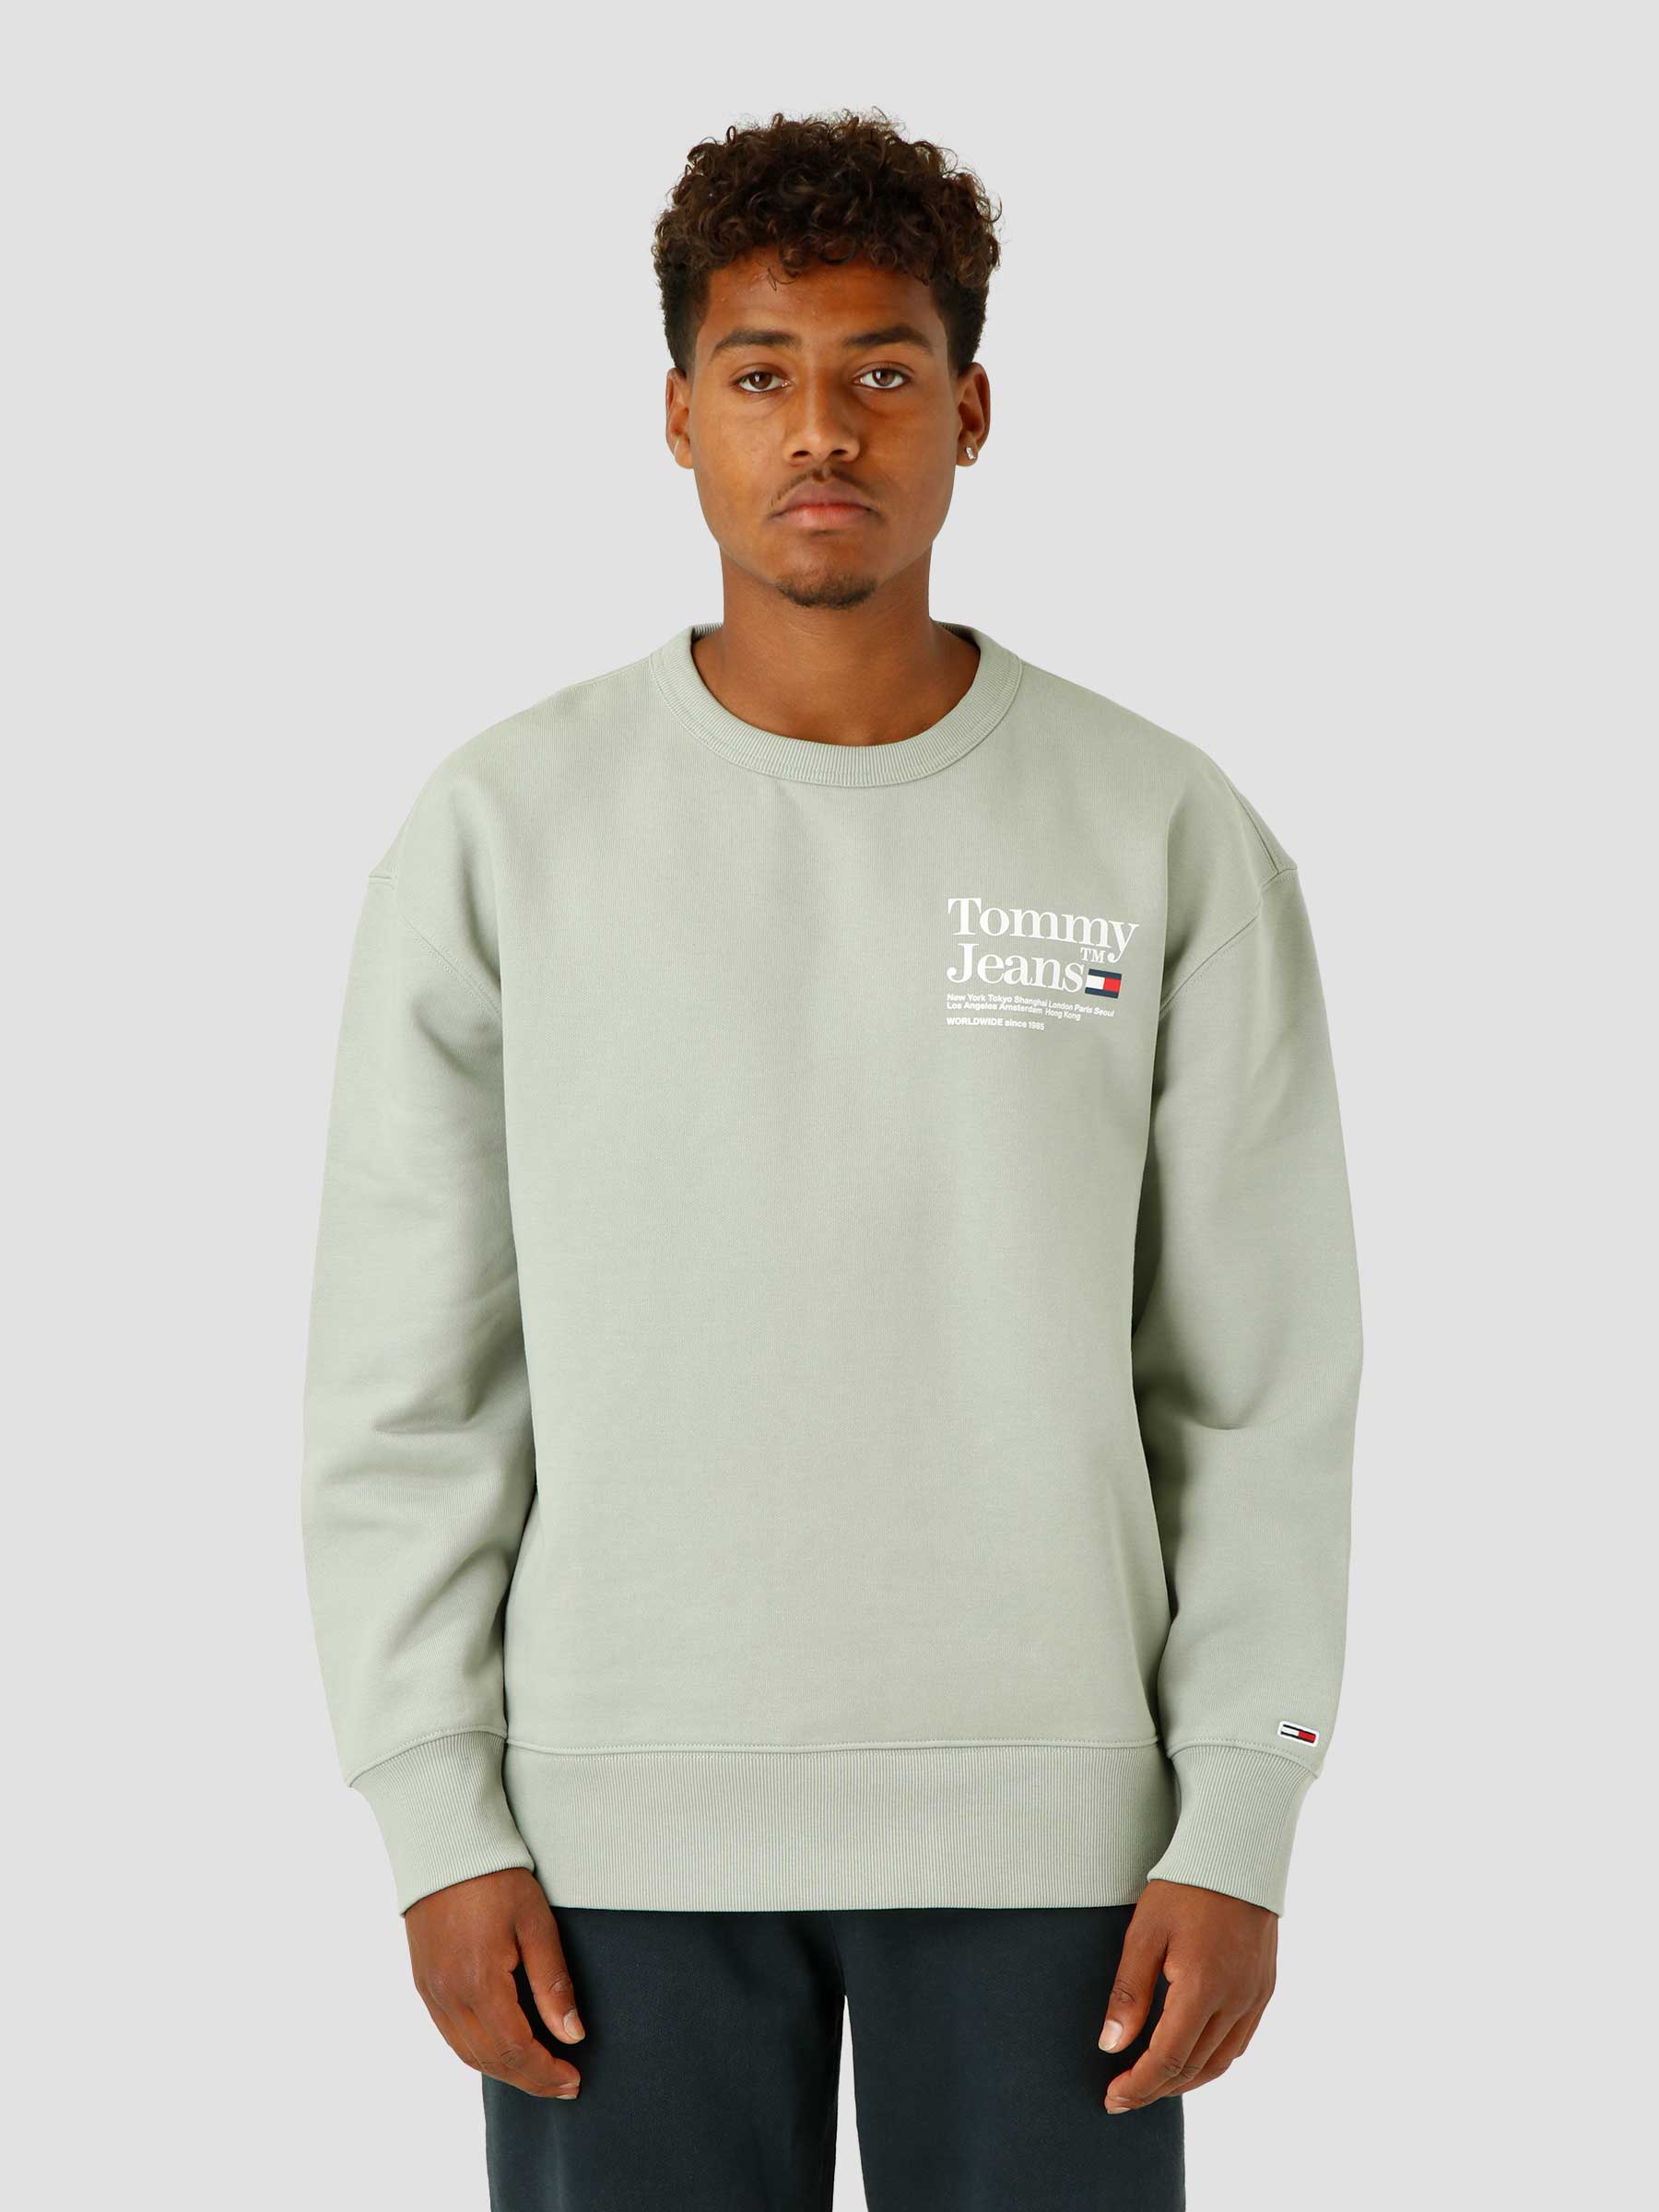 Tommy Jeans TJM Tommy Text Crewneck Faded Willow - Freshcotton